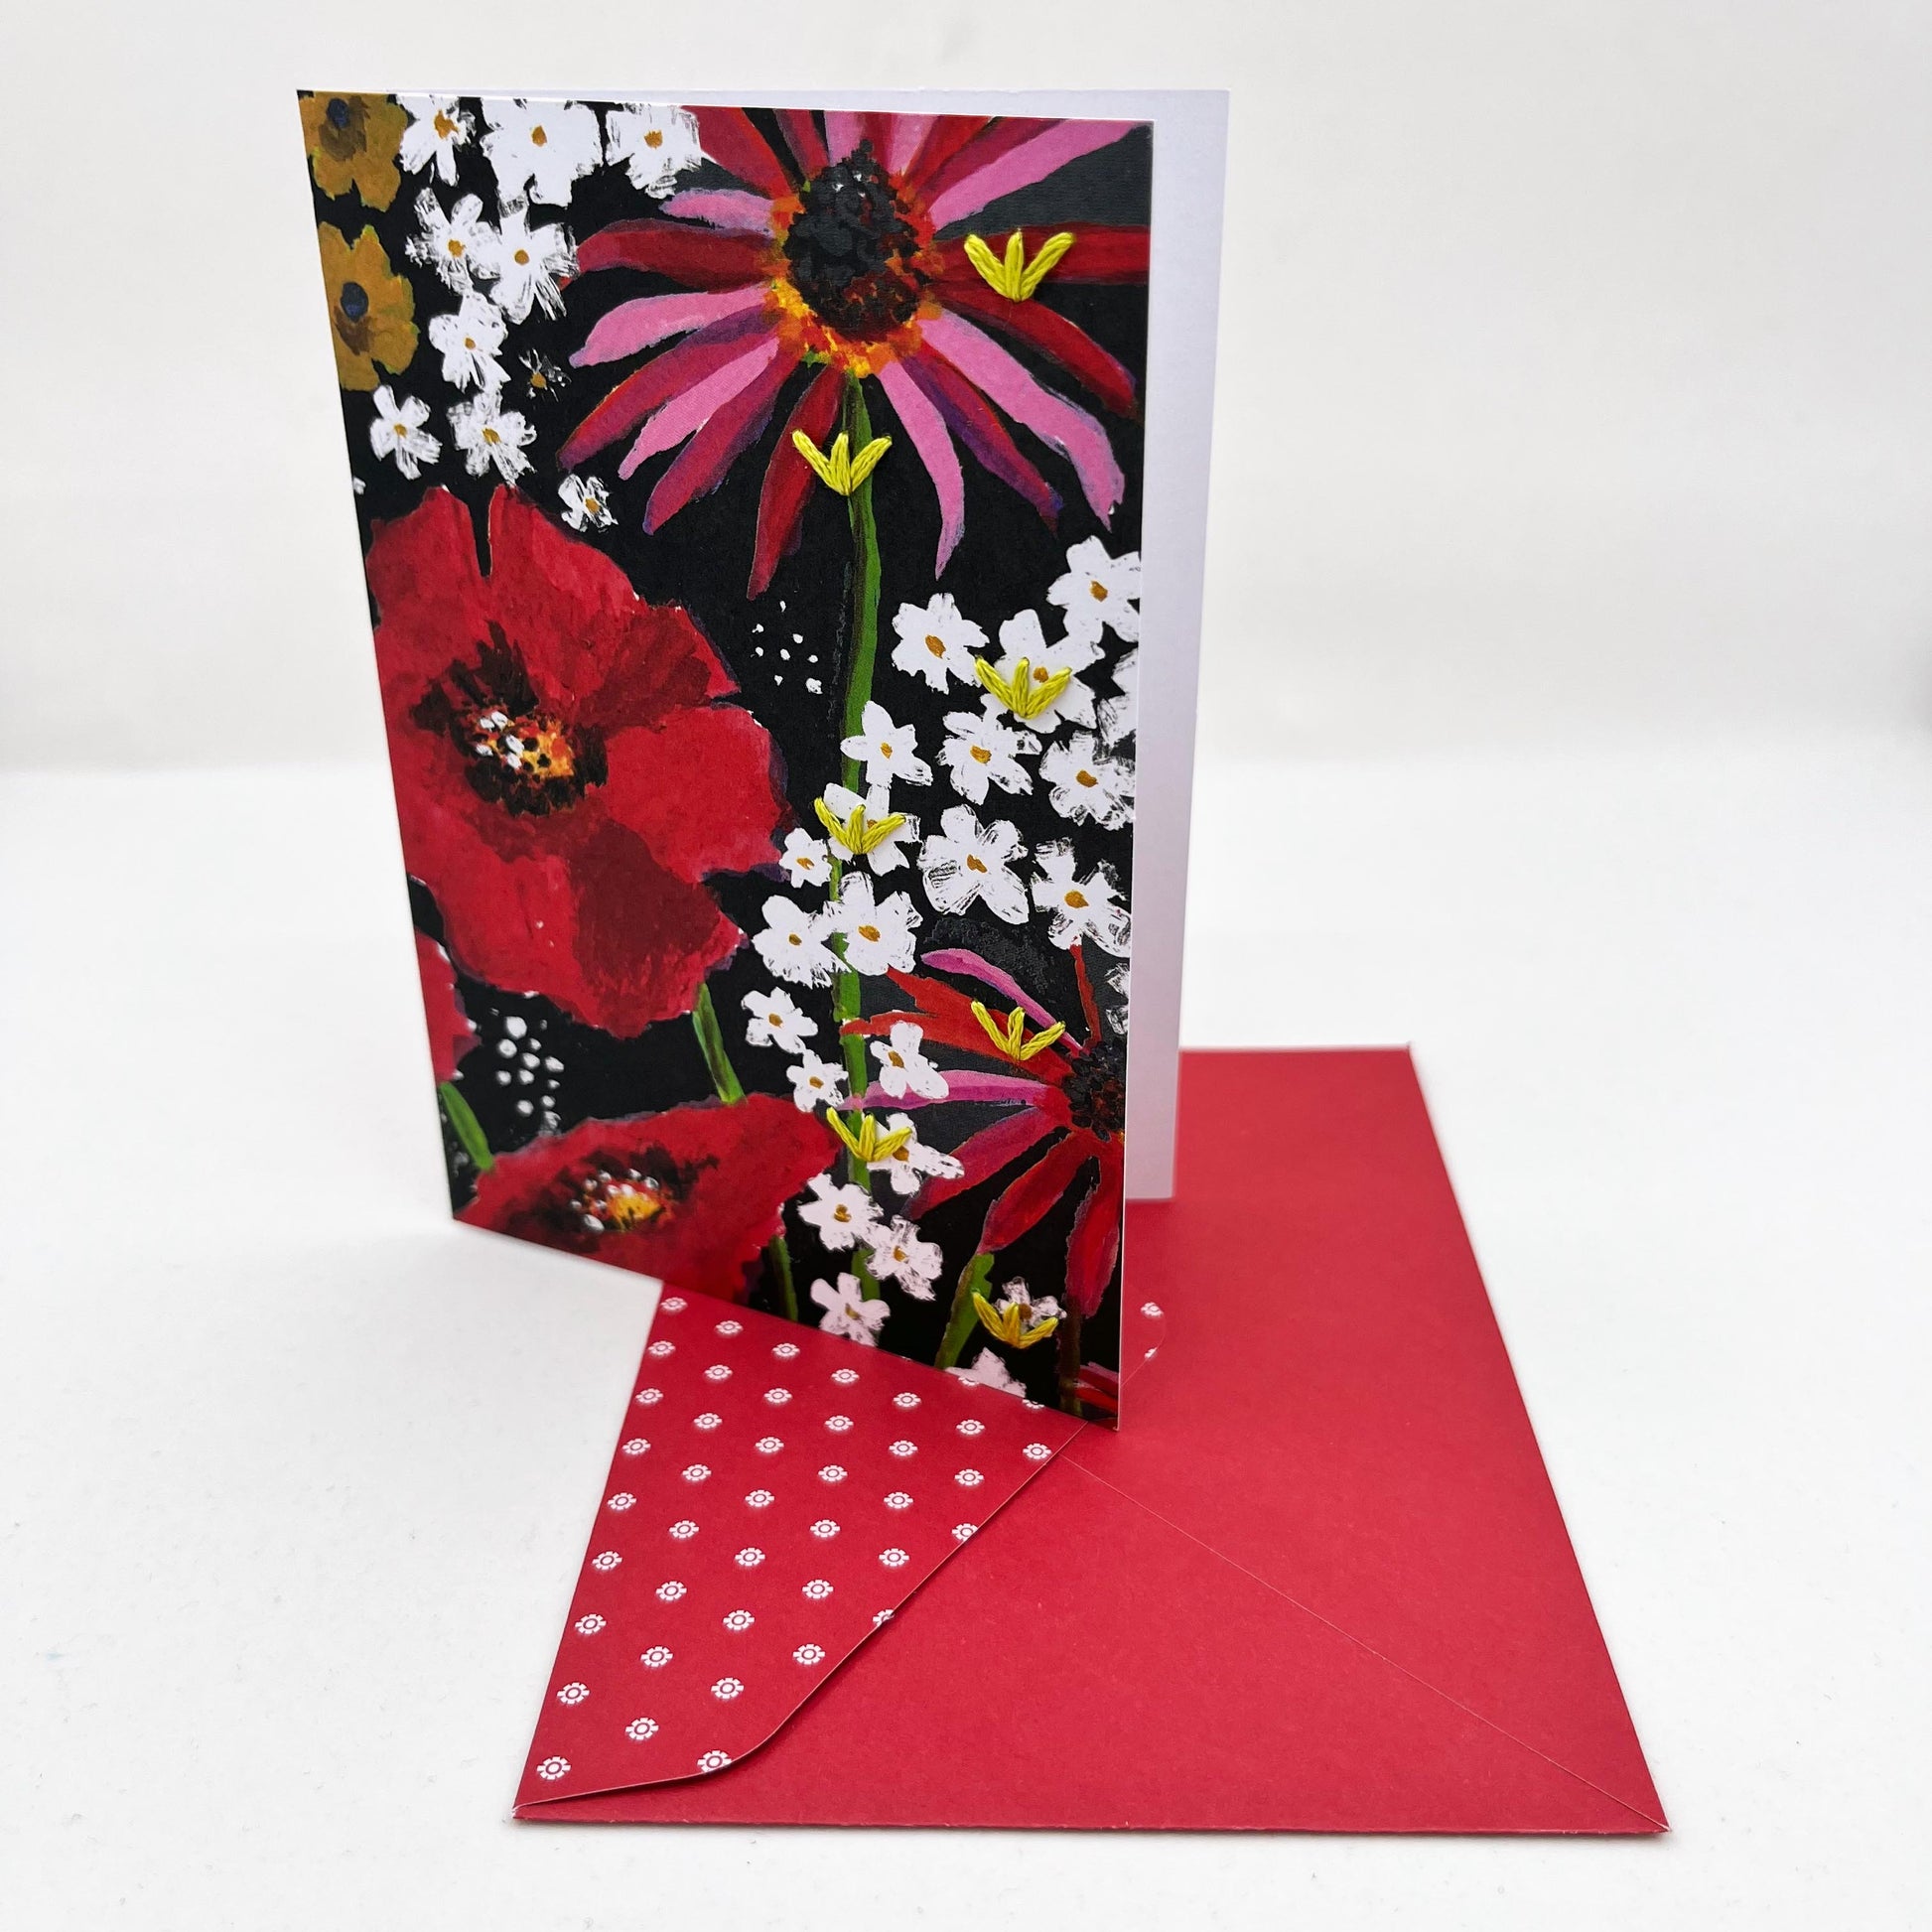 Greeting card standing upright on an envelope. artwork of painted flowers in red pink and white. Chartreuse stitches of sprout shapes in zig zag pattern on right side of card